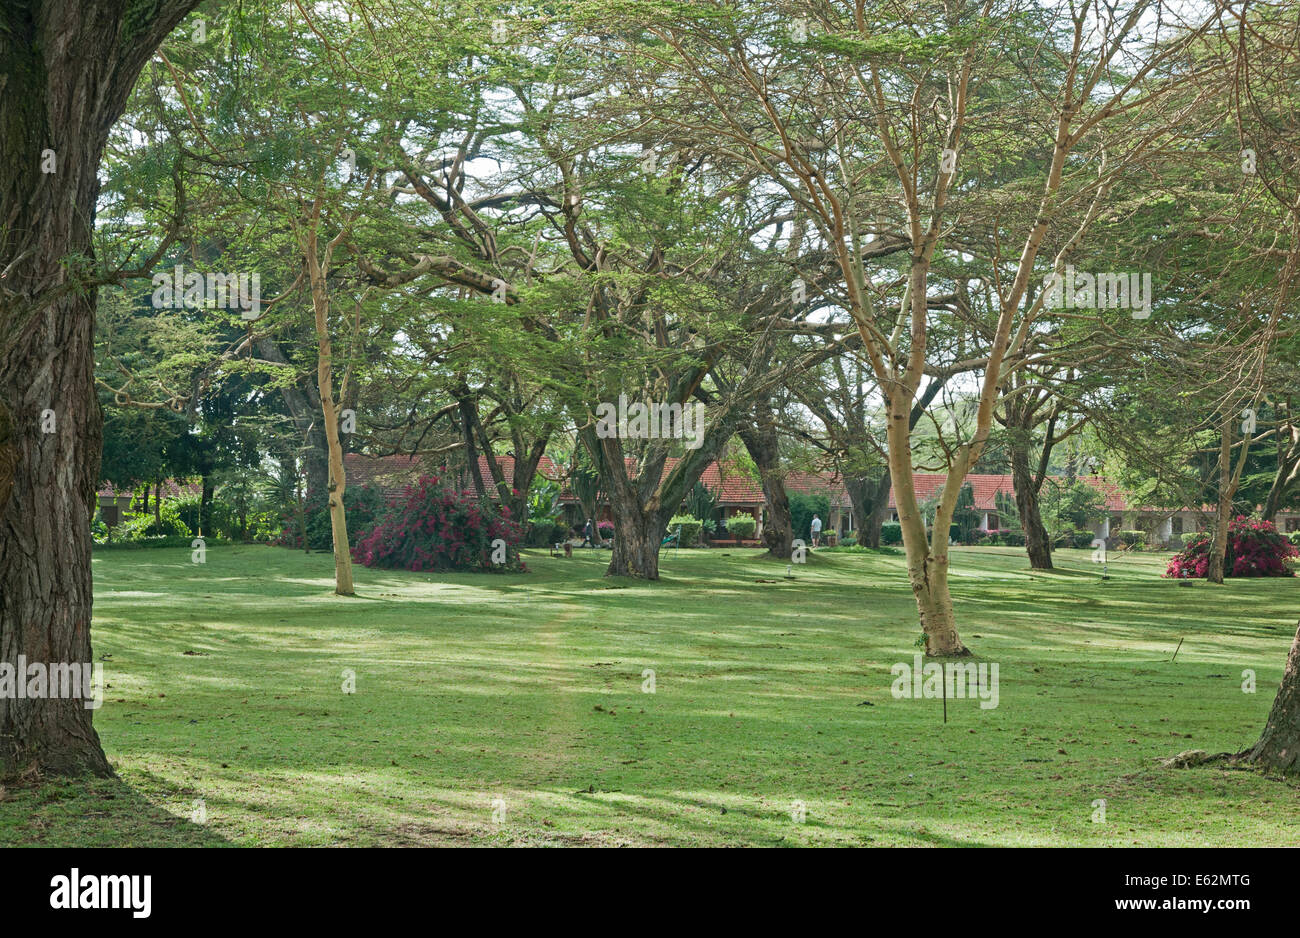 Cottage bedroosm of Lake Naivasha Country Club seen across green lawns under yellow barked Acacia trees Kenya Africa Stock Photo